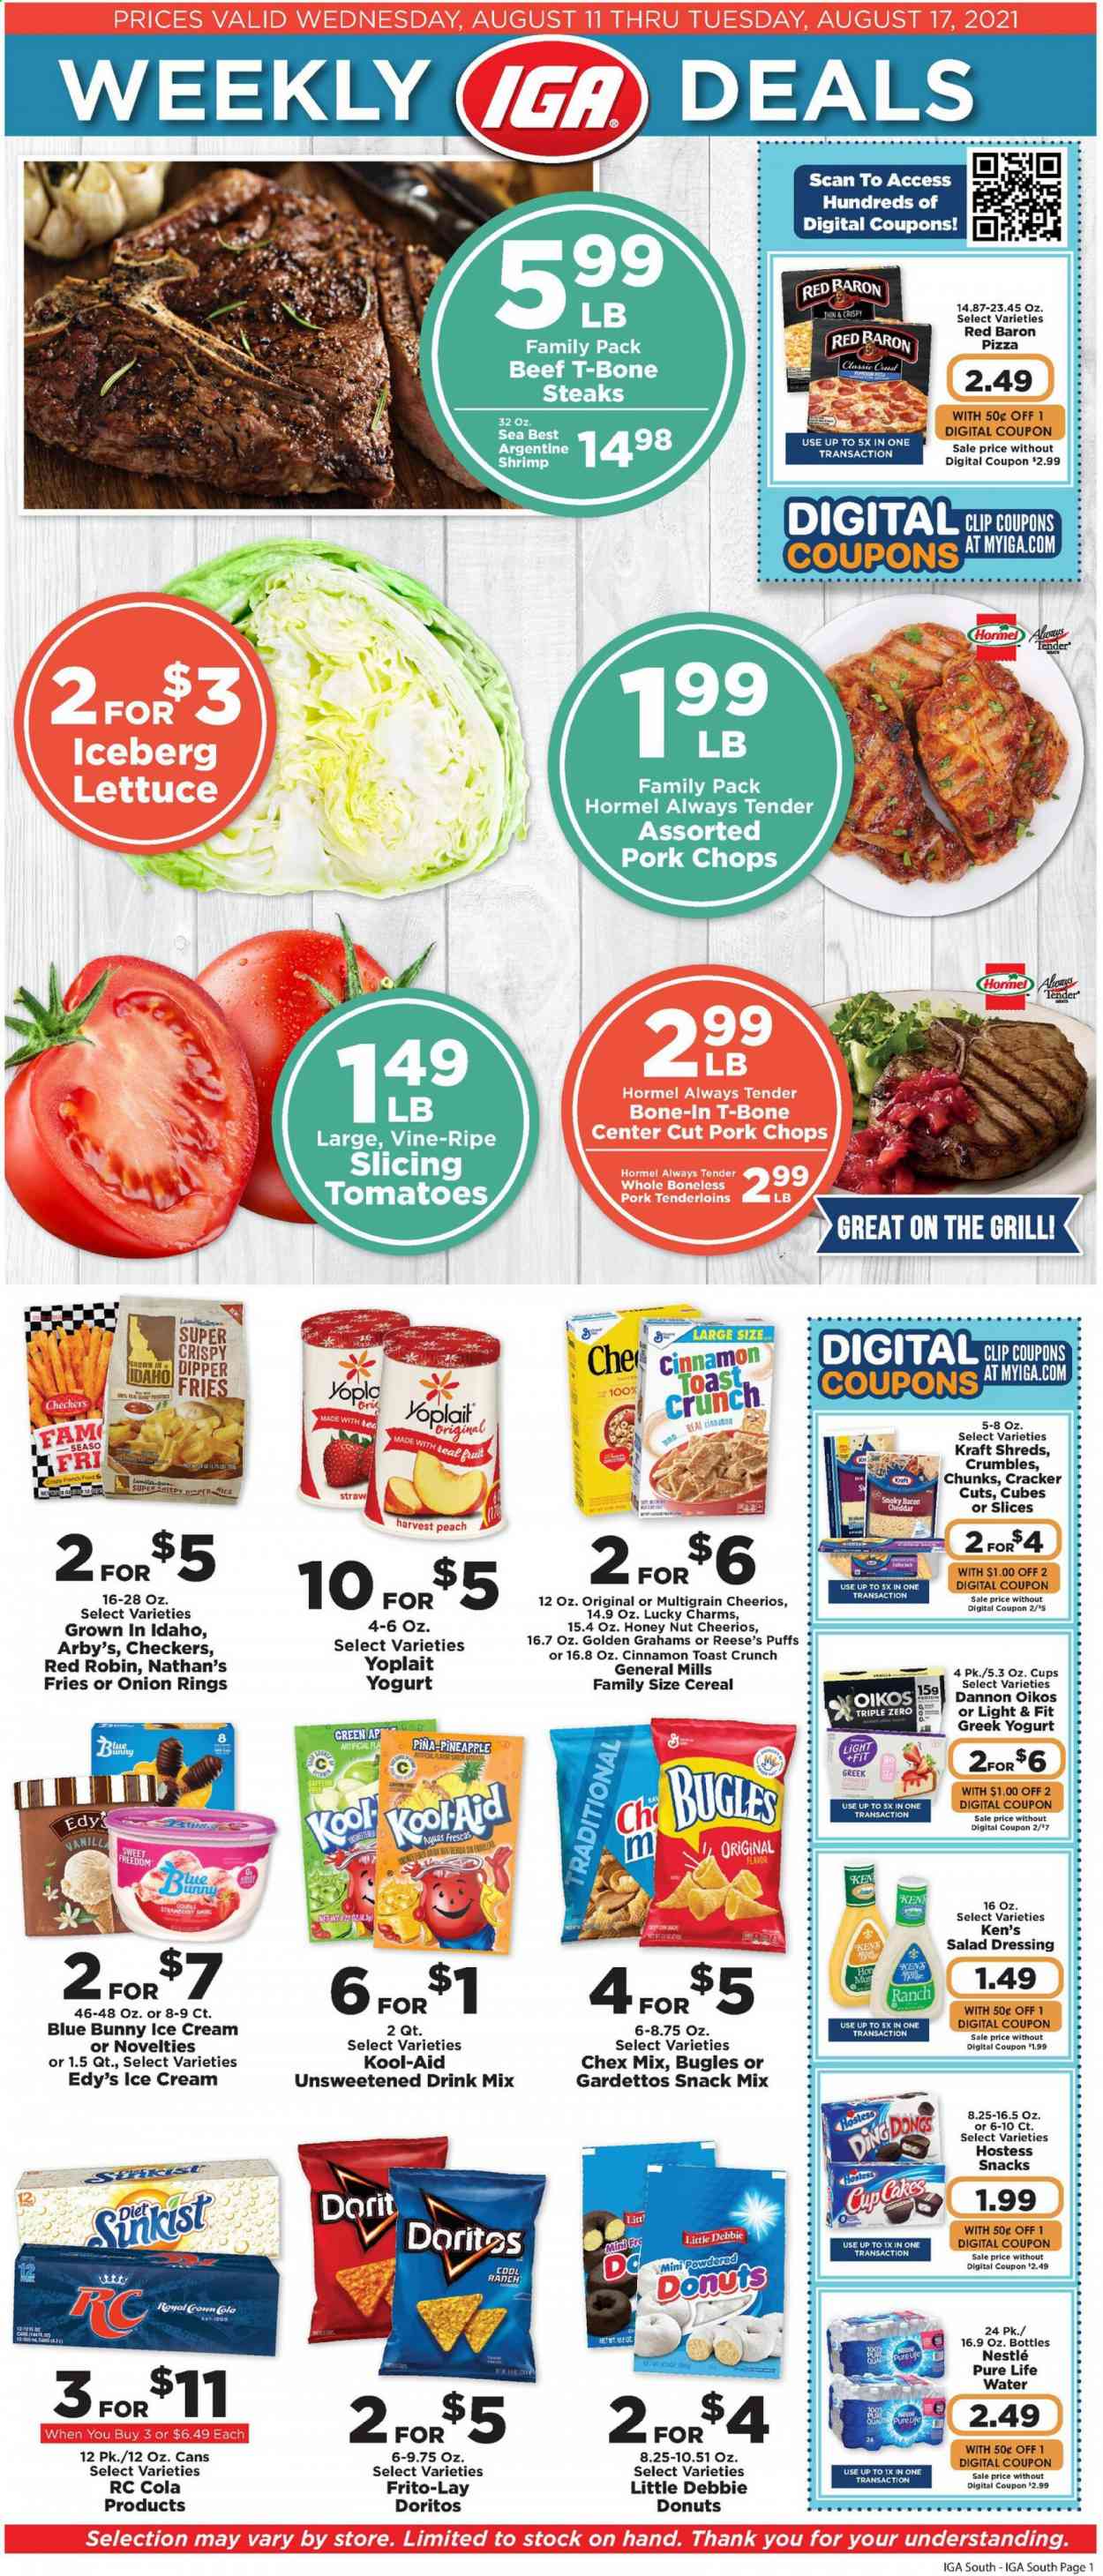 thumbnail - IGA Flyer - 08/11/2021 - 08/17/2021 - Sales products - cupcake, puffs, donut, lettuce, pineapple, shrimps, pizza, onion rings, Kraft®, Hormel, bacon, Colby cheese, cheddar, greek yoghurt, yoghurt, Oikos, Yoplait, Dannon, ice cream, Reese's, Ola, Blue Bunny, potato fries, Red Baron, Nestlé, snack, crackers, Doritos, Frito-Lay, Chex Mix, cereals, Cheerios, cinnamon, salad dressing, dressing, Pure Life Water, beef meat, t-bone steak, steak, pork chops, pork meat, pork tenderloin, Crest, cup, straw. Page 1.